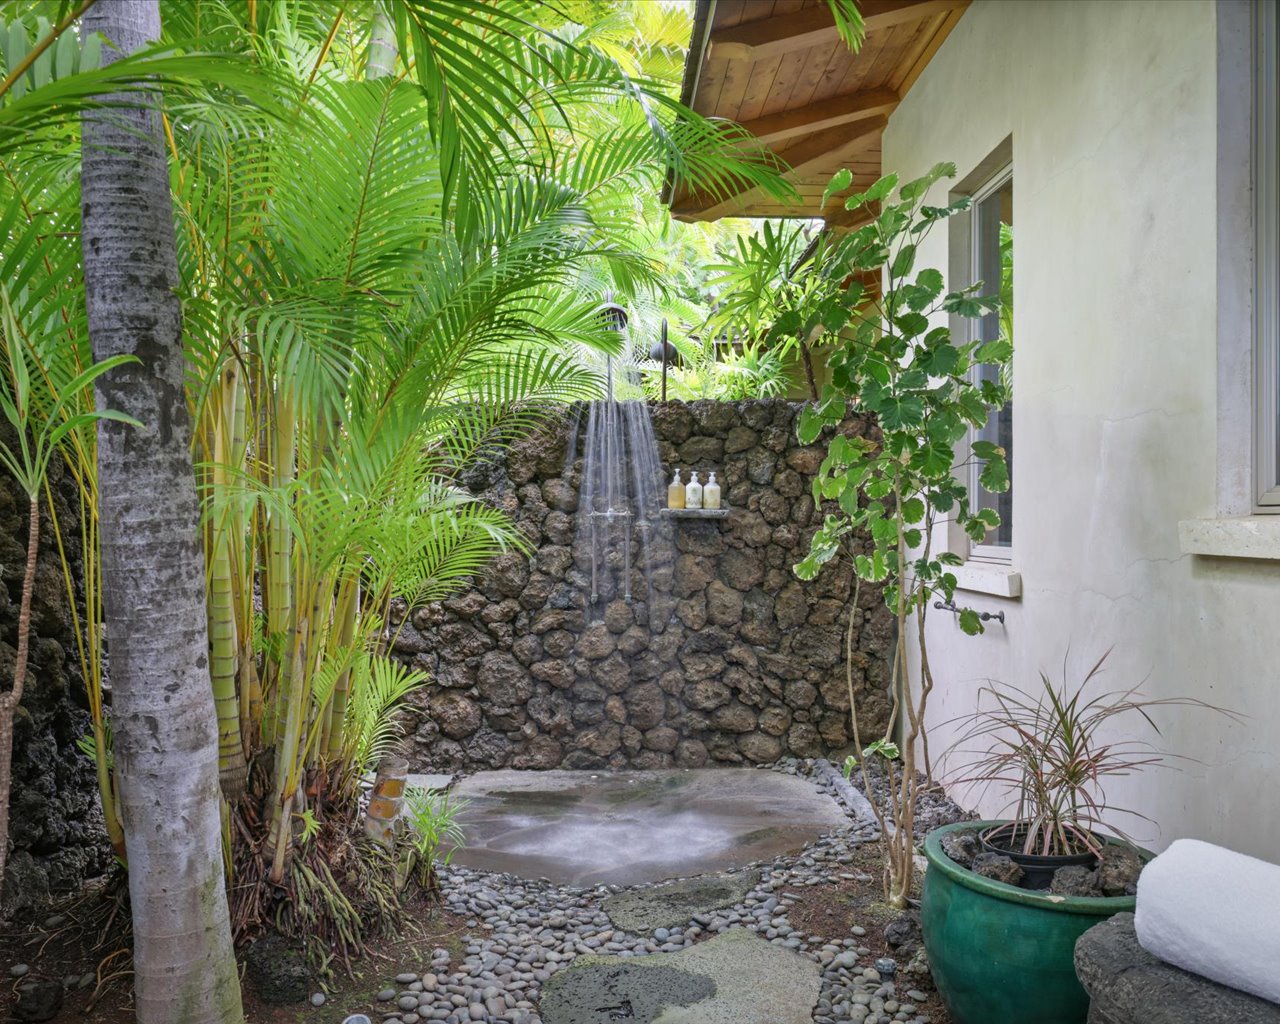 Kailua Kona Vacation Rentals, 3BD Pakui Street (131) Estate Home at Four Seasons Resort at Hualalai - Take a step outside of the primary bathroom to enjoy this tropical treat